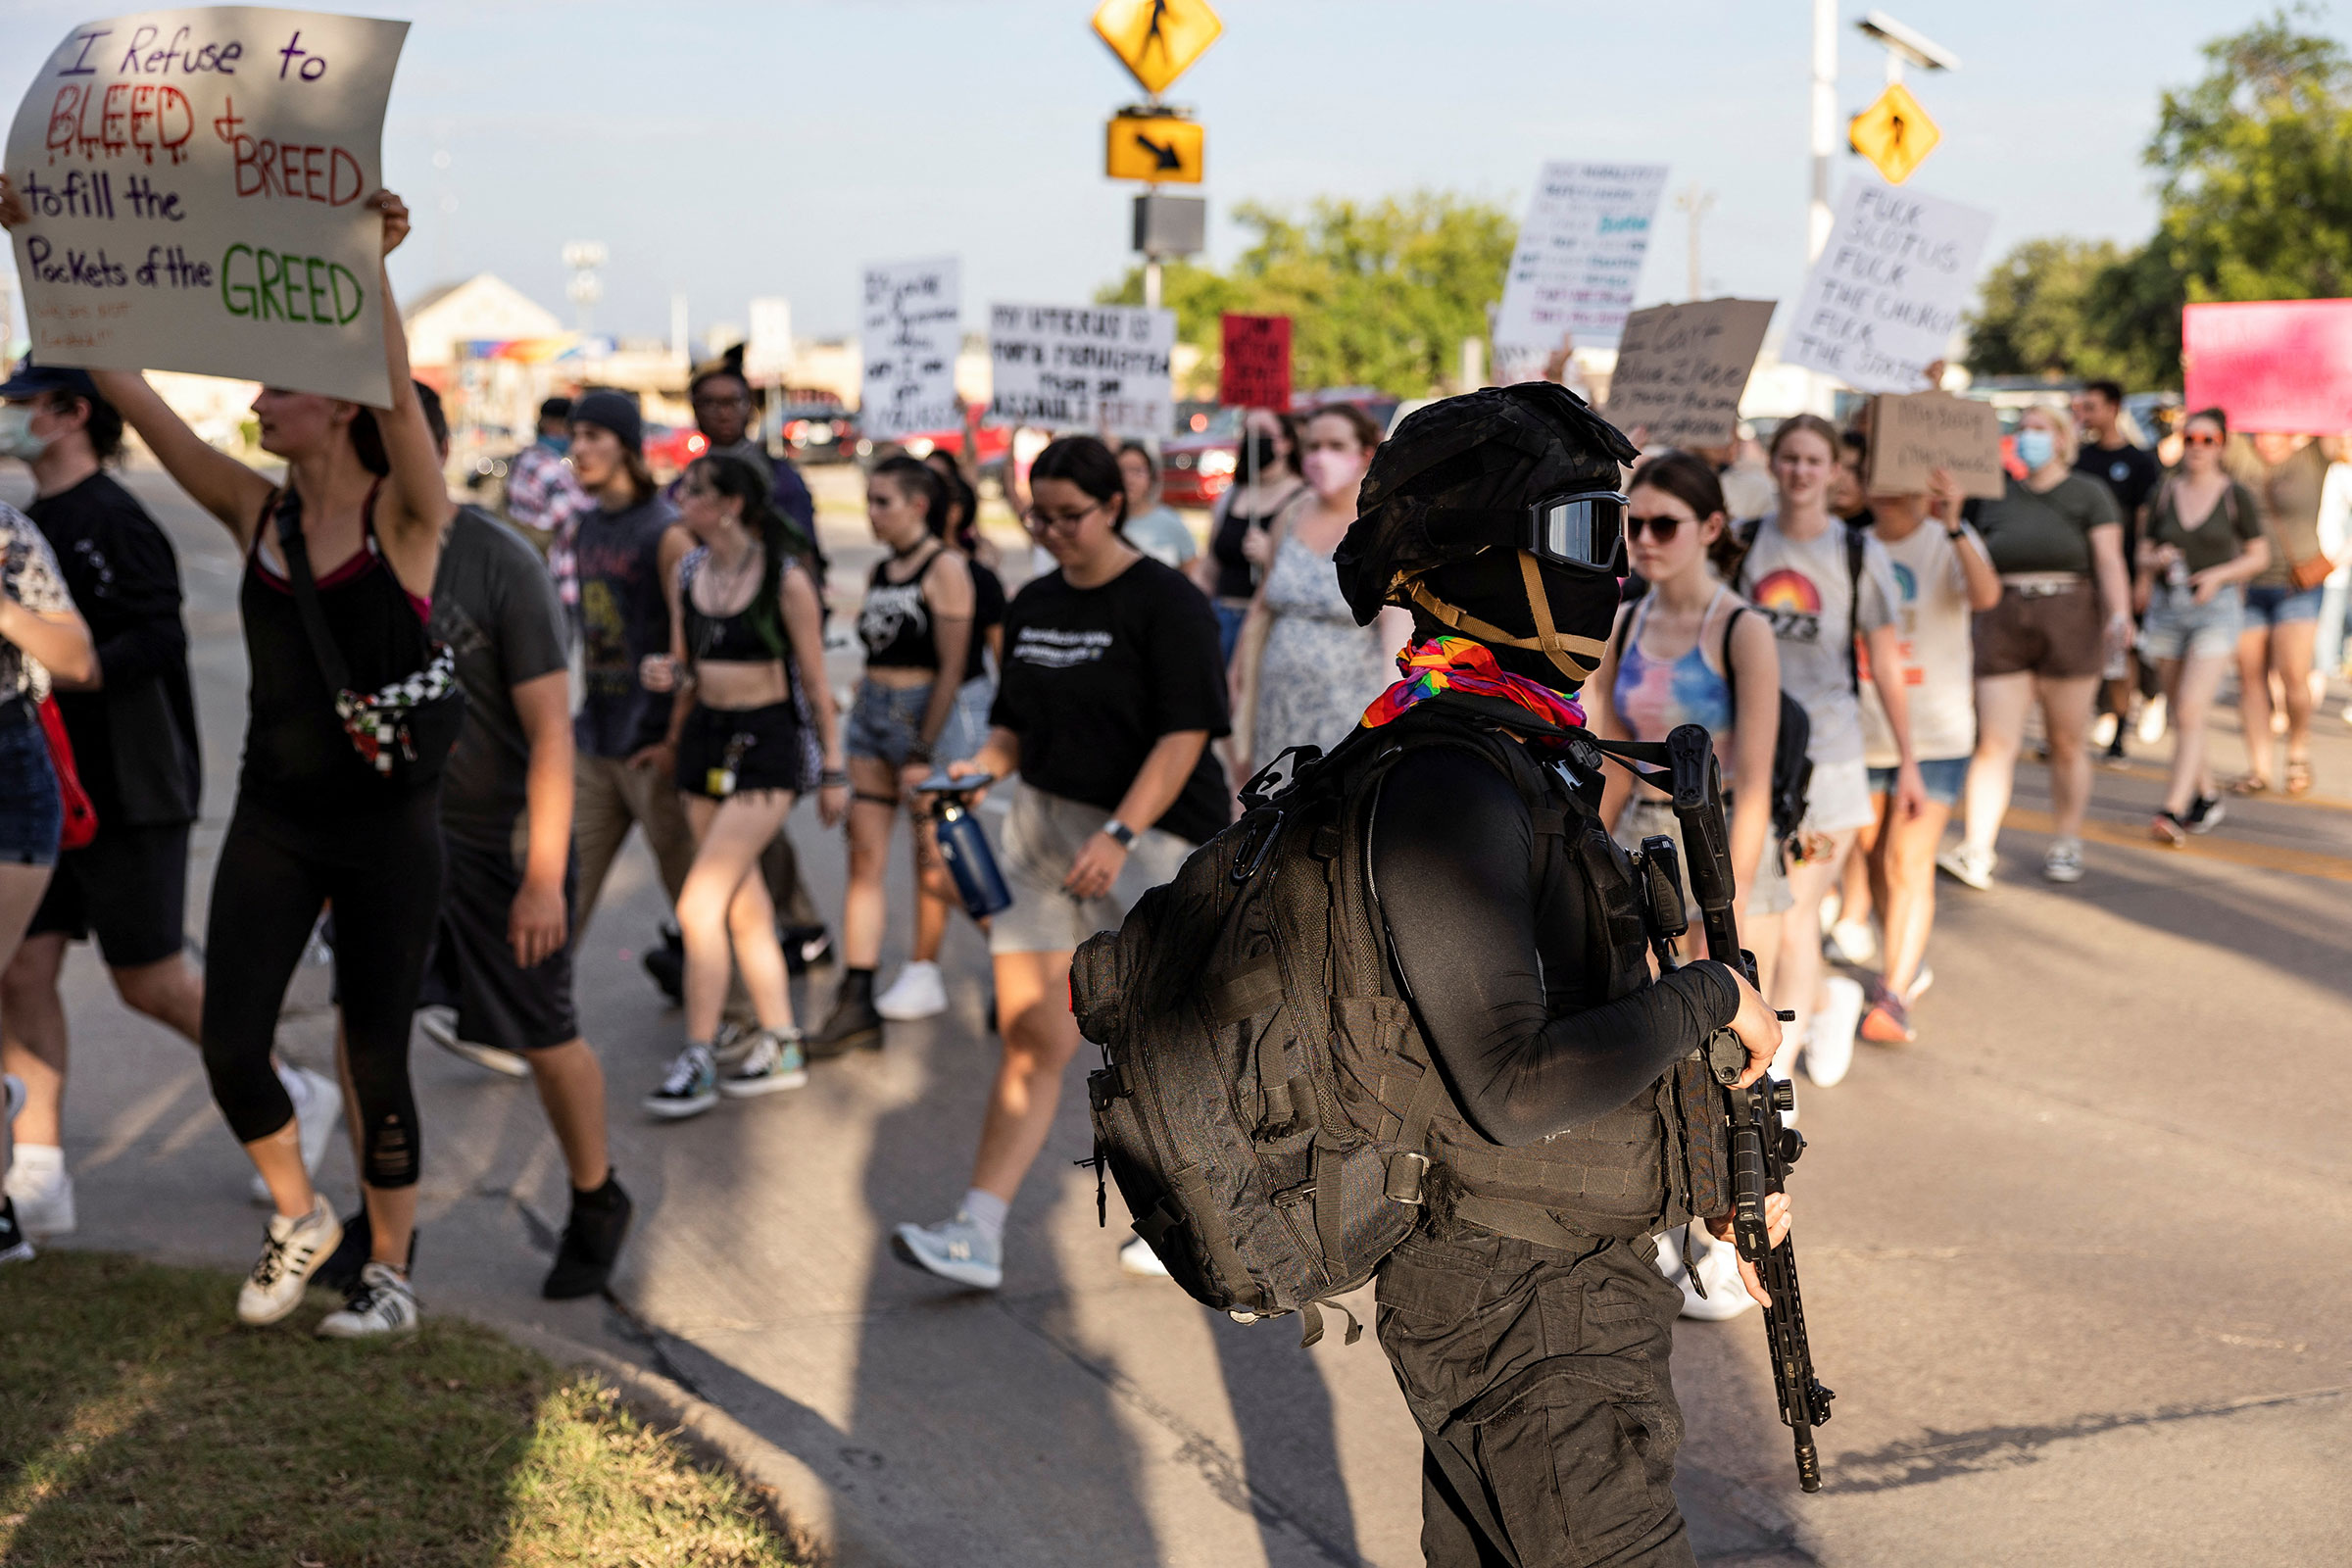 Armed militia members guard the route of abortion rights demonstrators’ march in downtown Denton Texas, on June 28, 2022. (Shelby Tauber—Reuters)